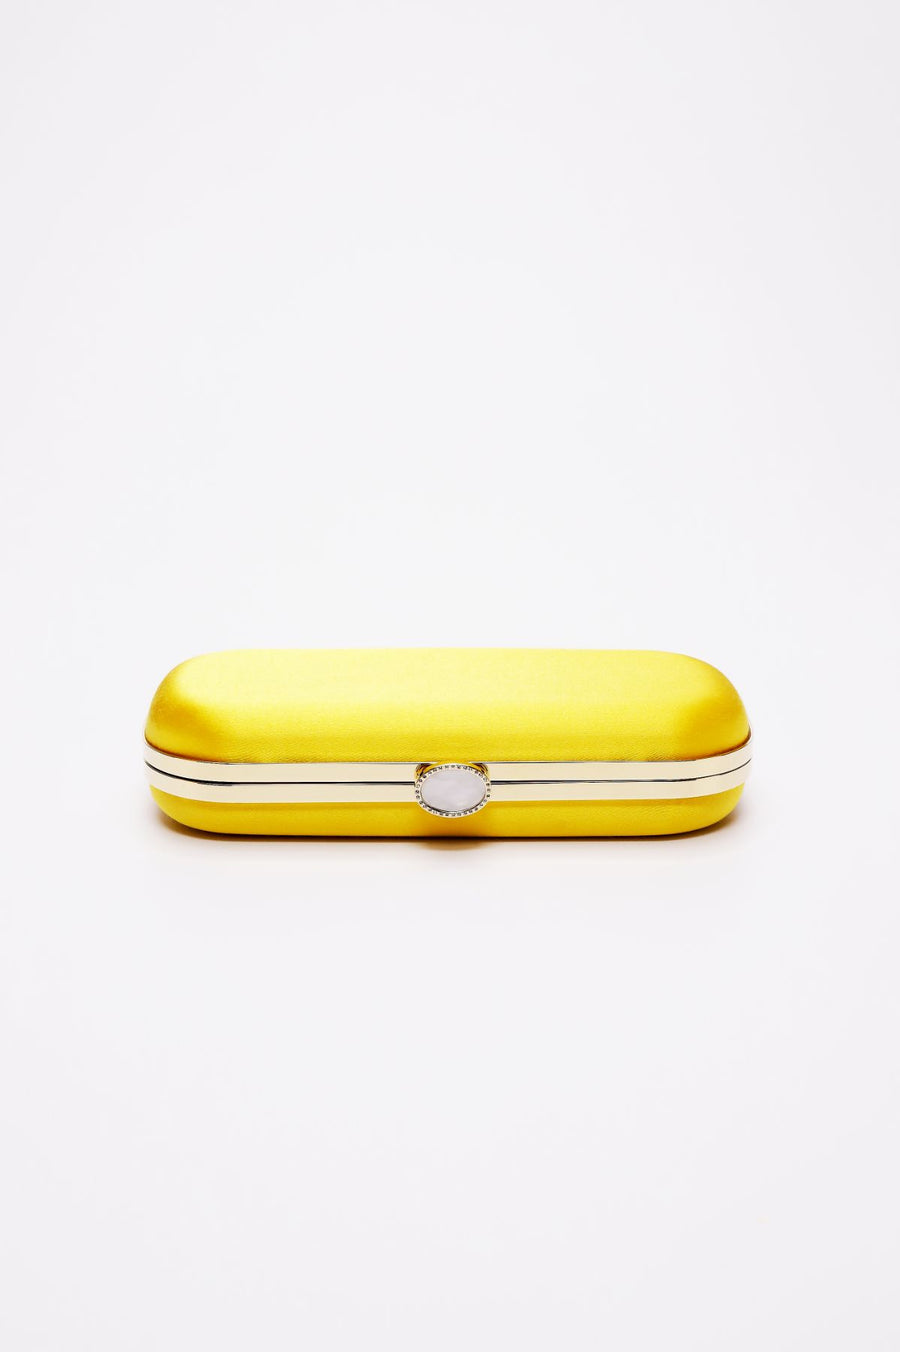 Top closed view of Bella Clutch in Limoncello yellow satin with gold hardware frame.